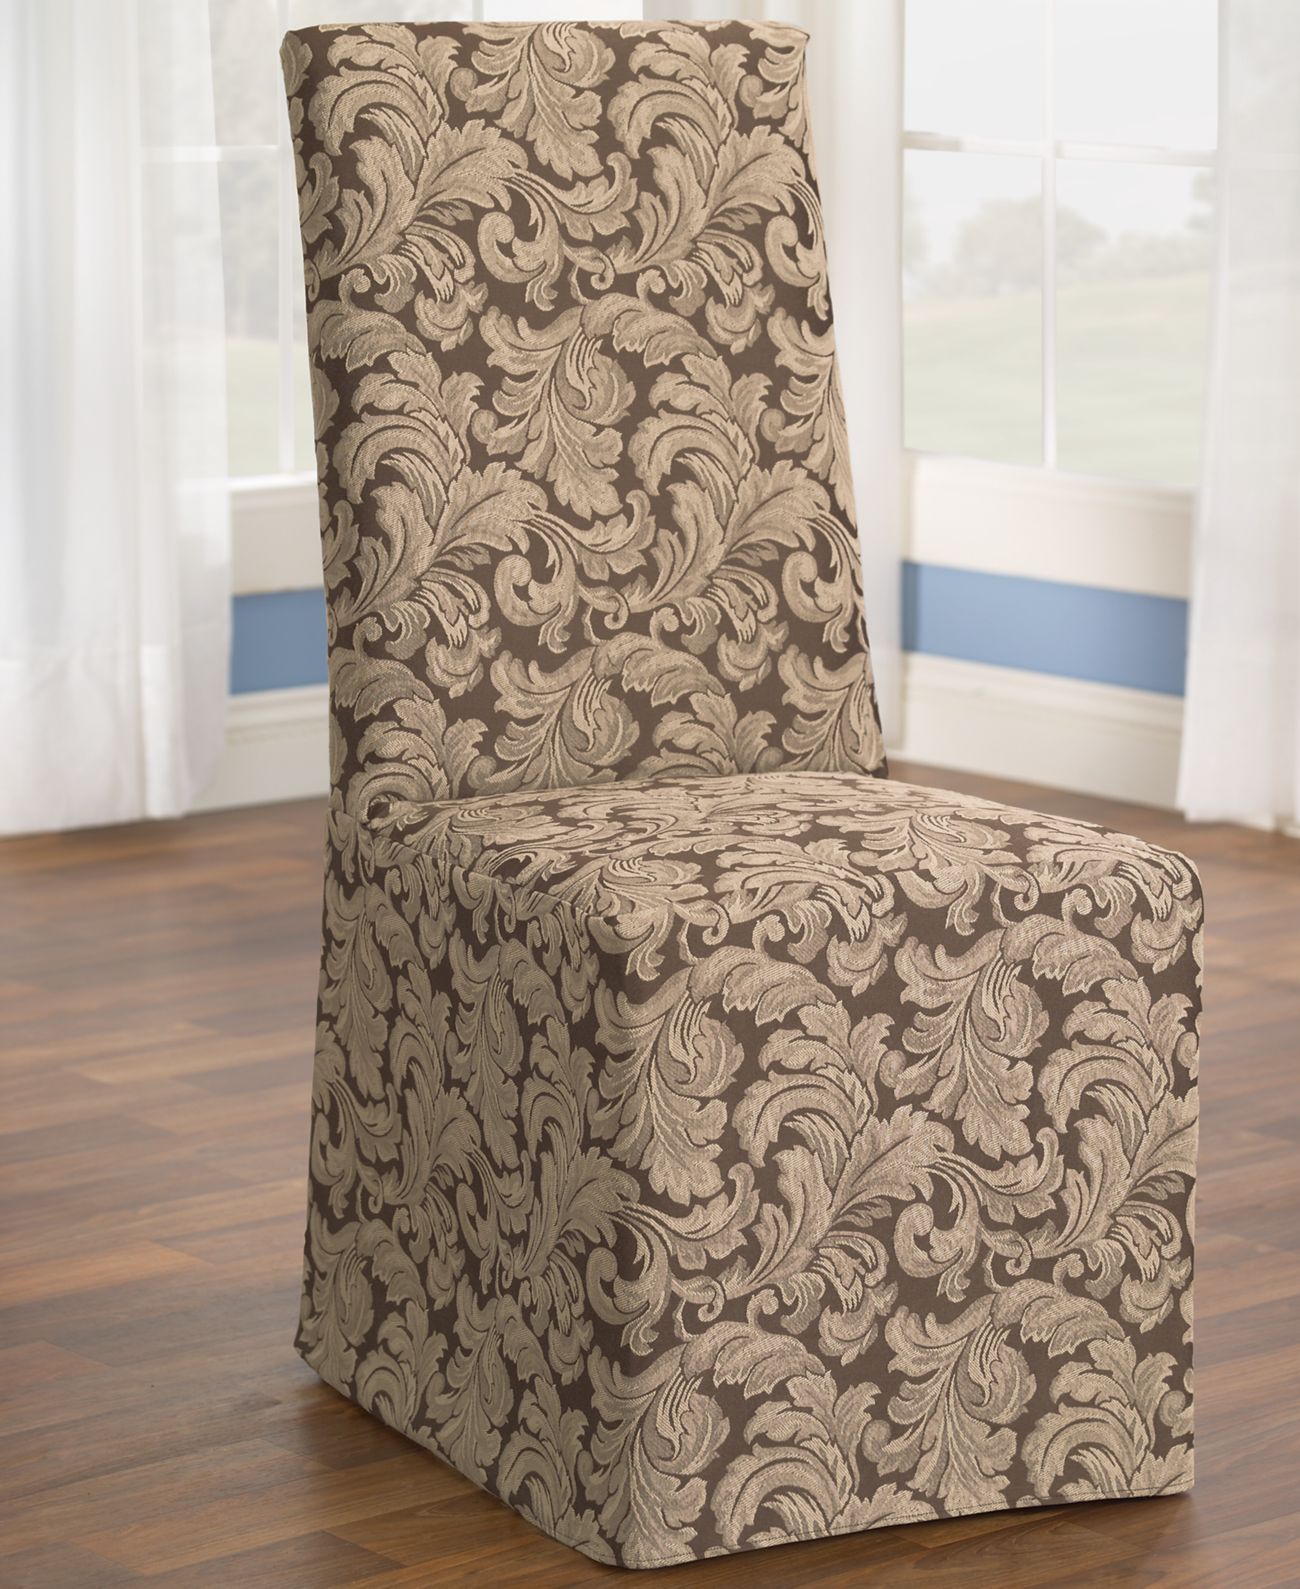 Sure Fit Scroll Long Dining Room Chair Slipcover - image 1 of 3